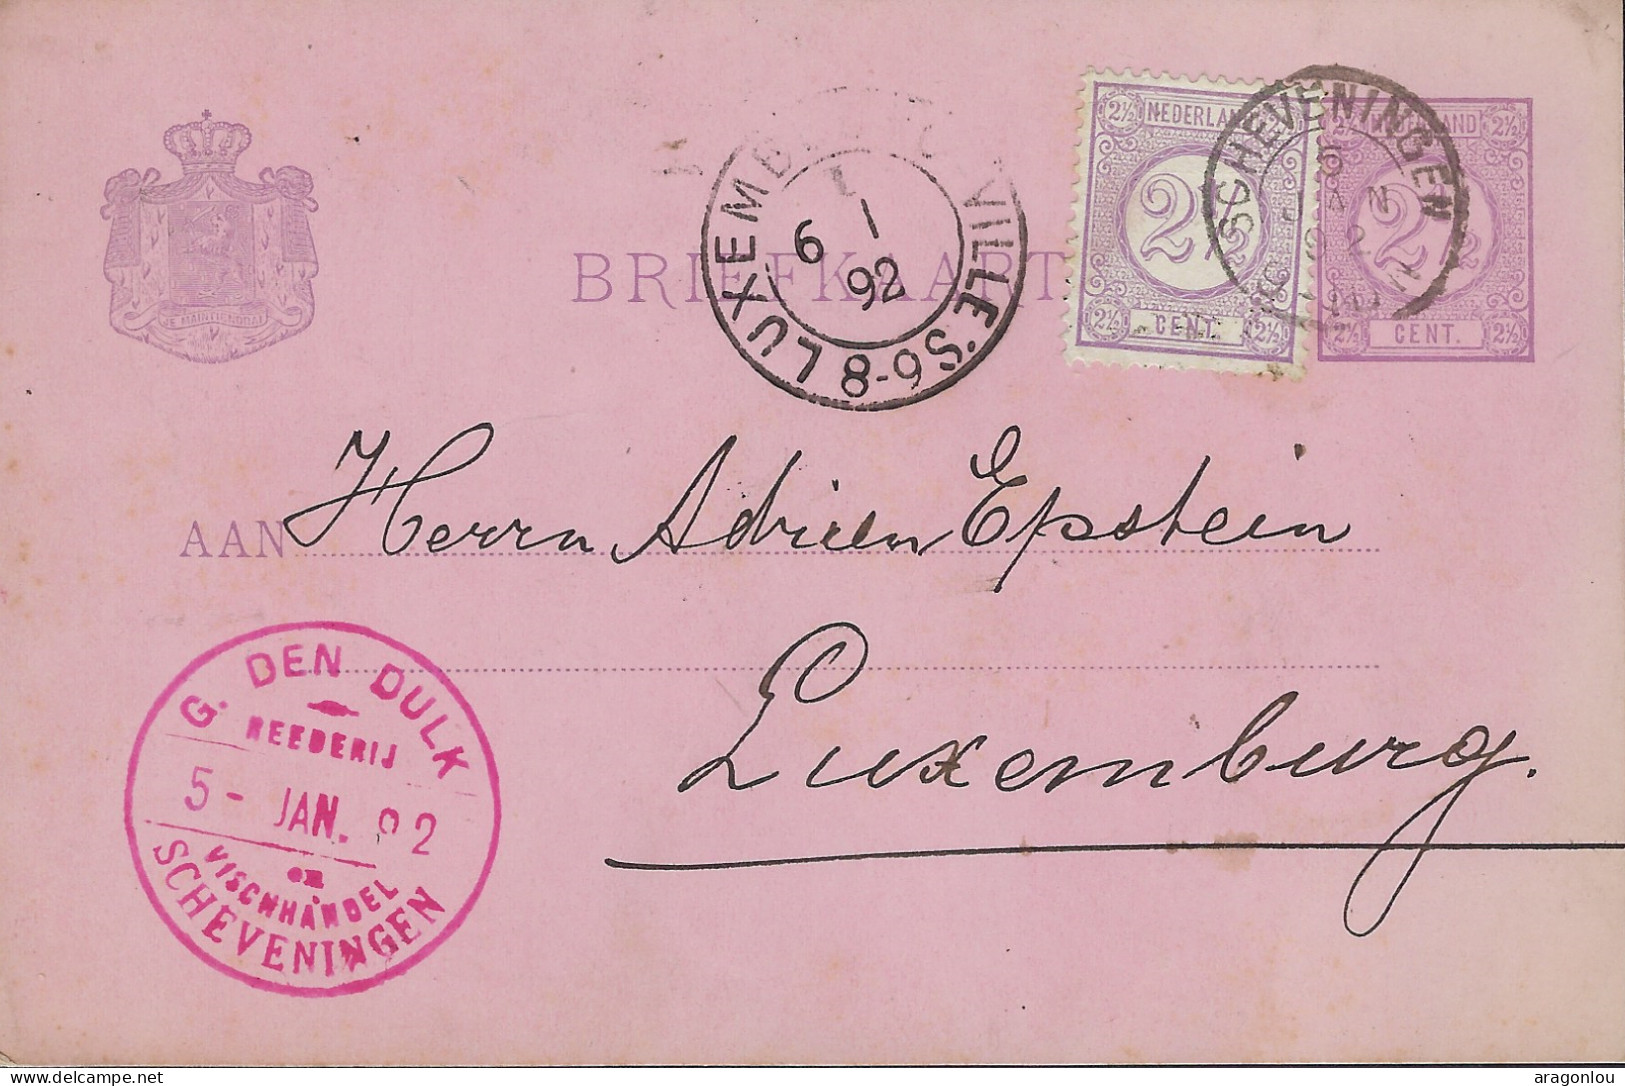 Luxembourg - Luxemburg - Carte - Postale  -  1892  -  Cachet Luxembourg  -  Scheweningen - Stamped Stationery